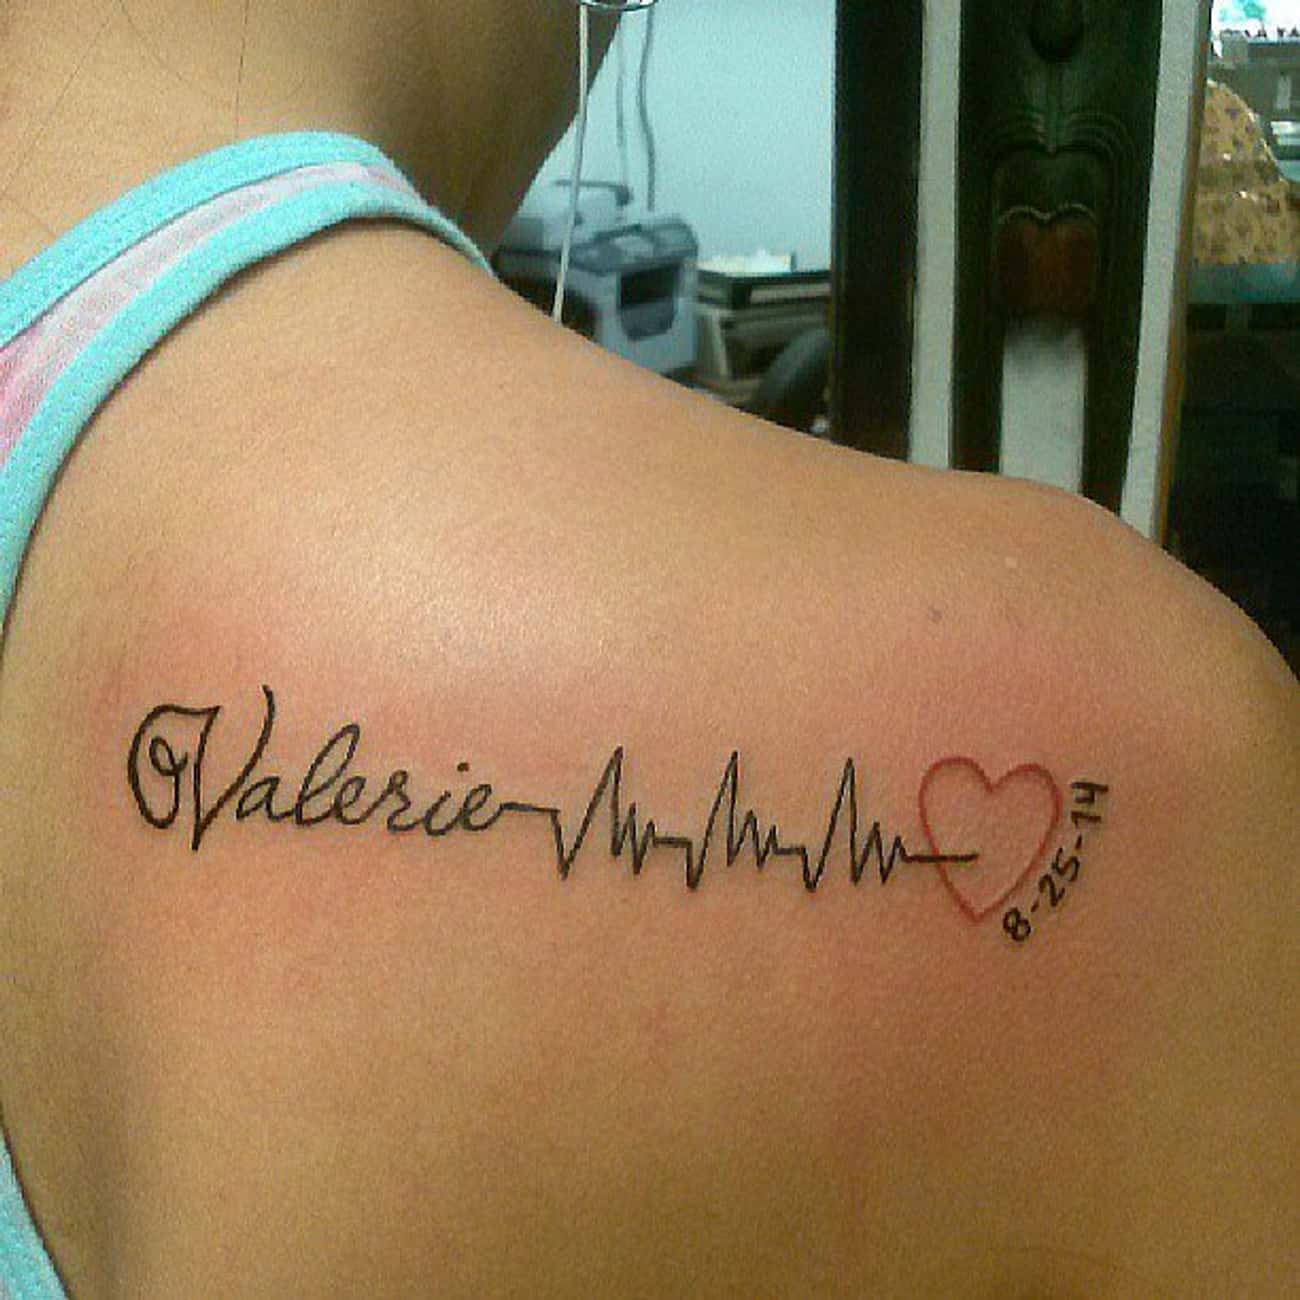 This Mom Got A Tattoo Of The First Time She Heard Her Baby's Heart